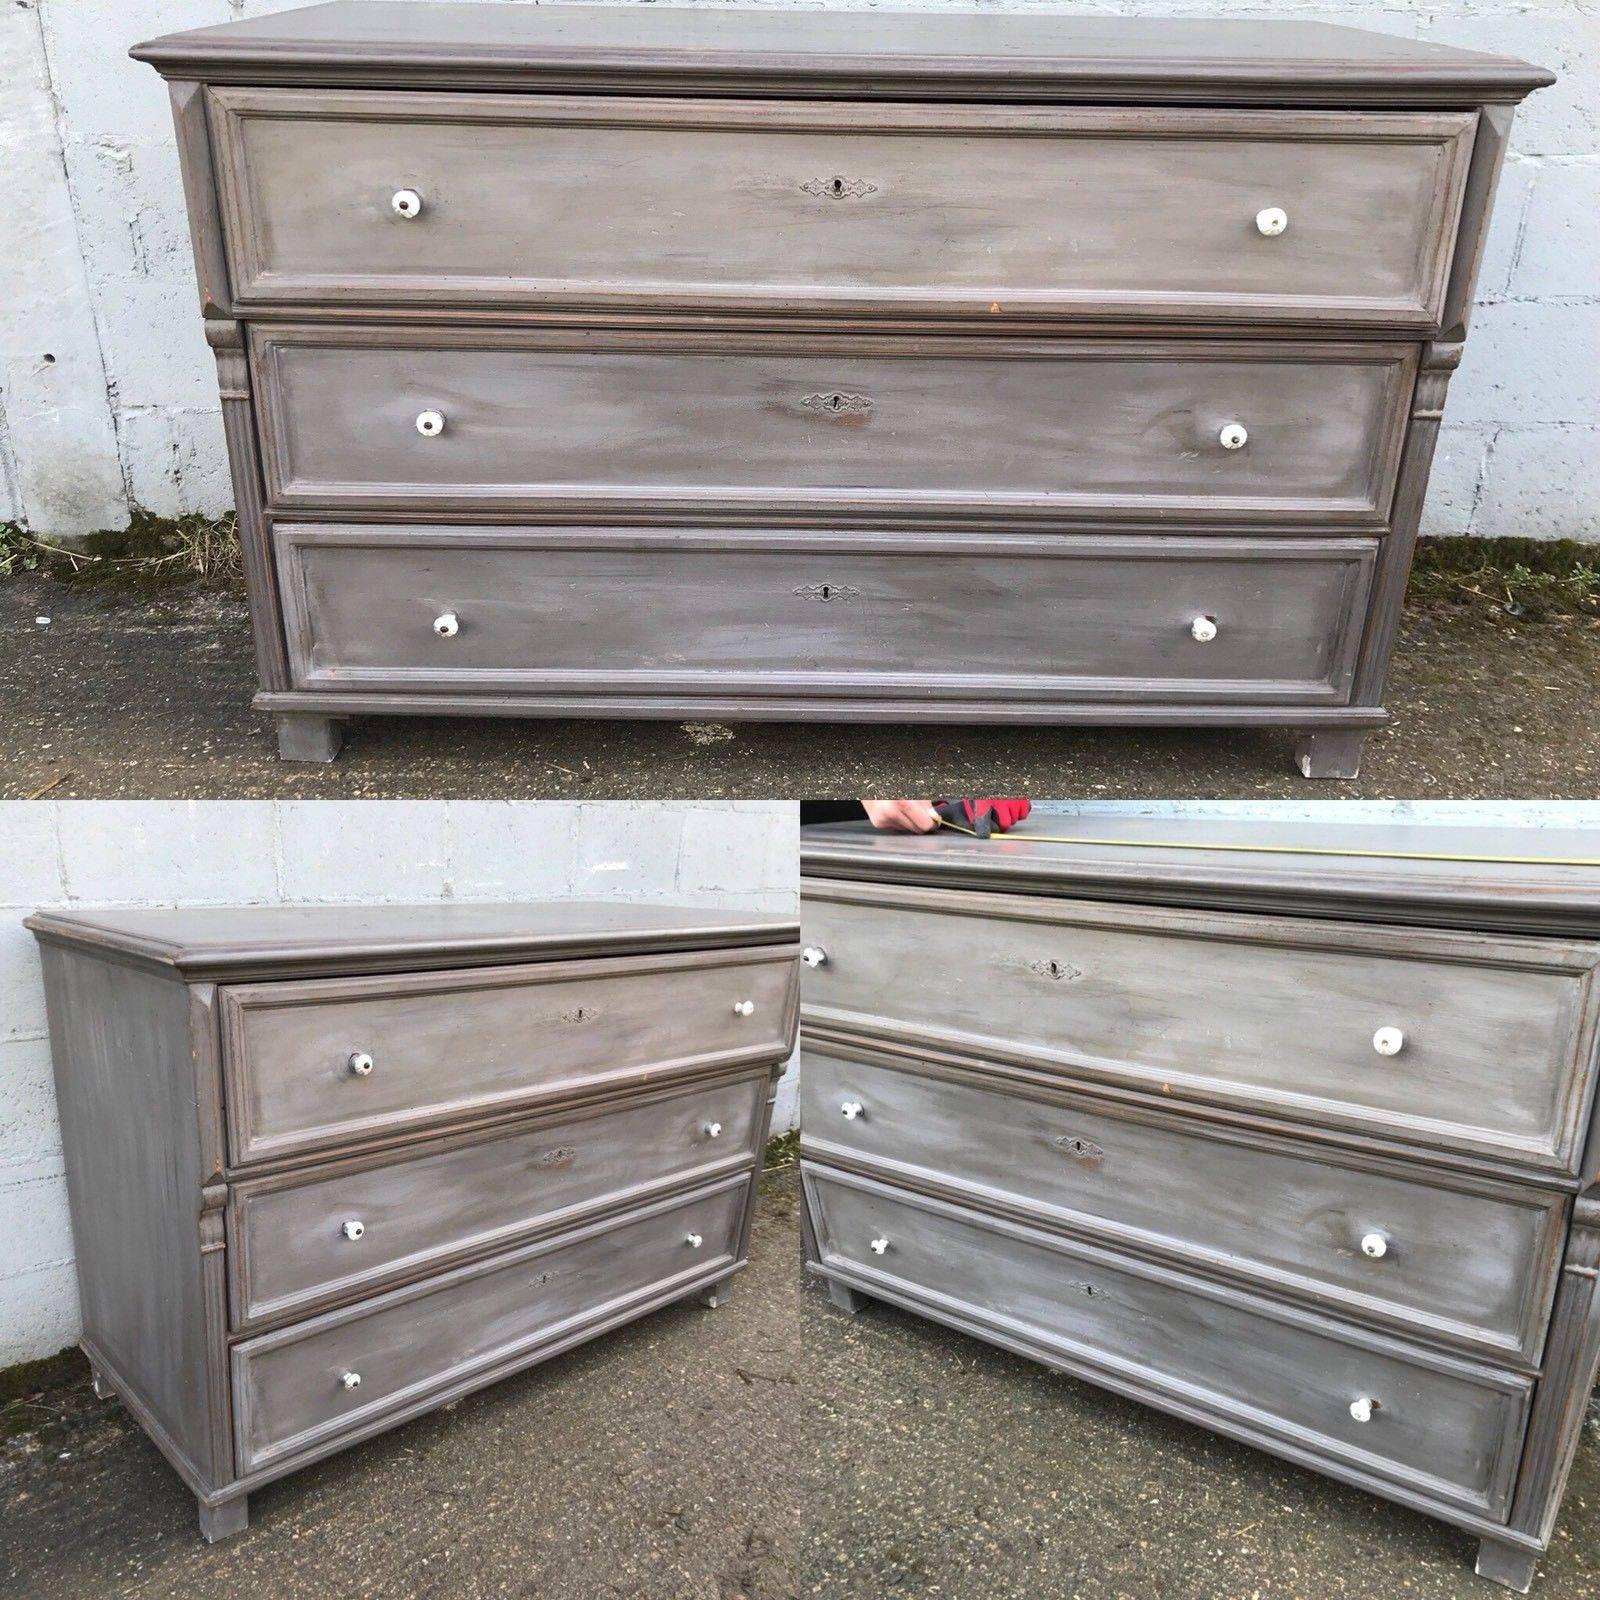 Here we have a beautiful French chest of drawers with lovely patina. All drawers are working perfectly and the paint work is fantastic.

Dimensions: 153 cm long, 63 cm deep, 96 cm